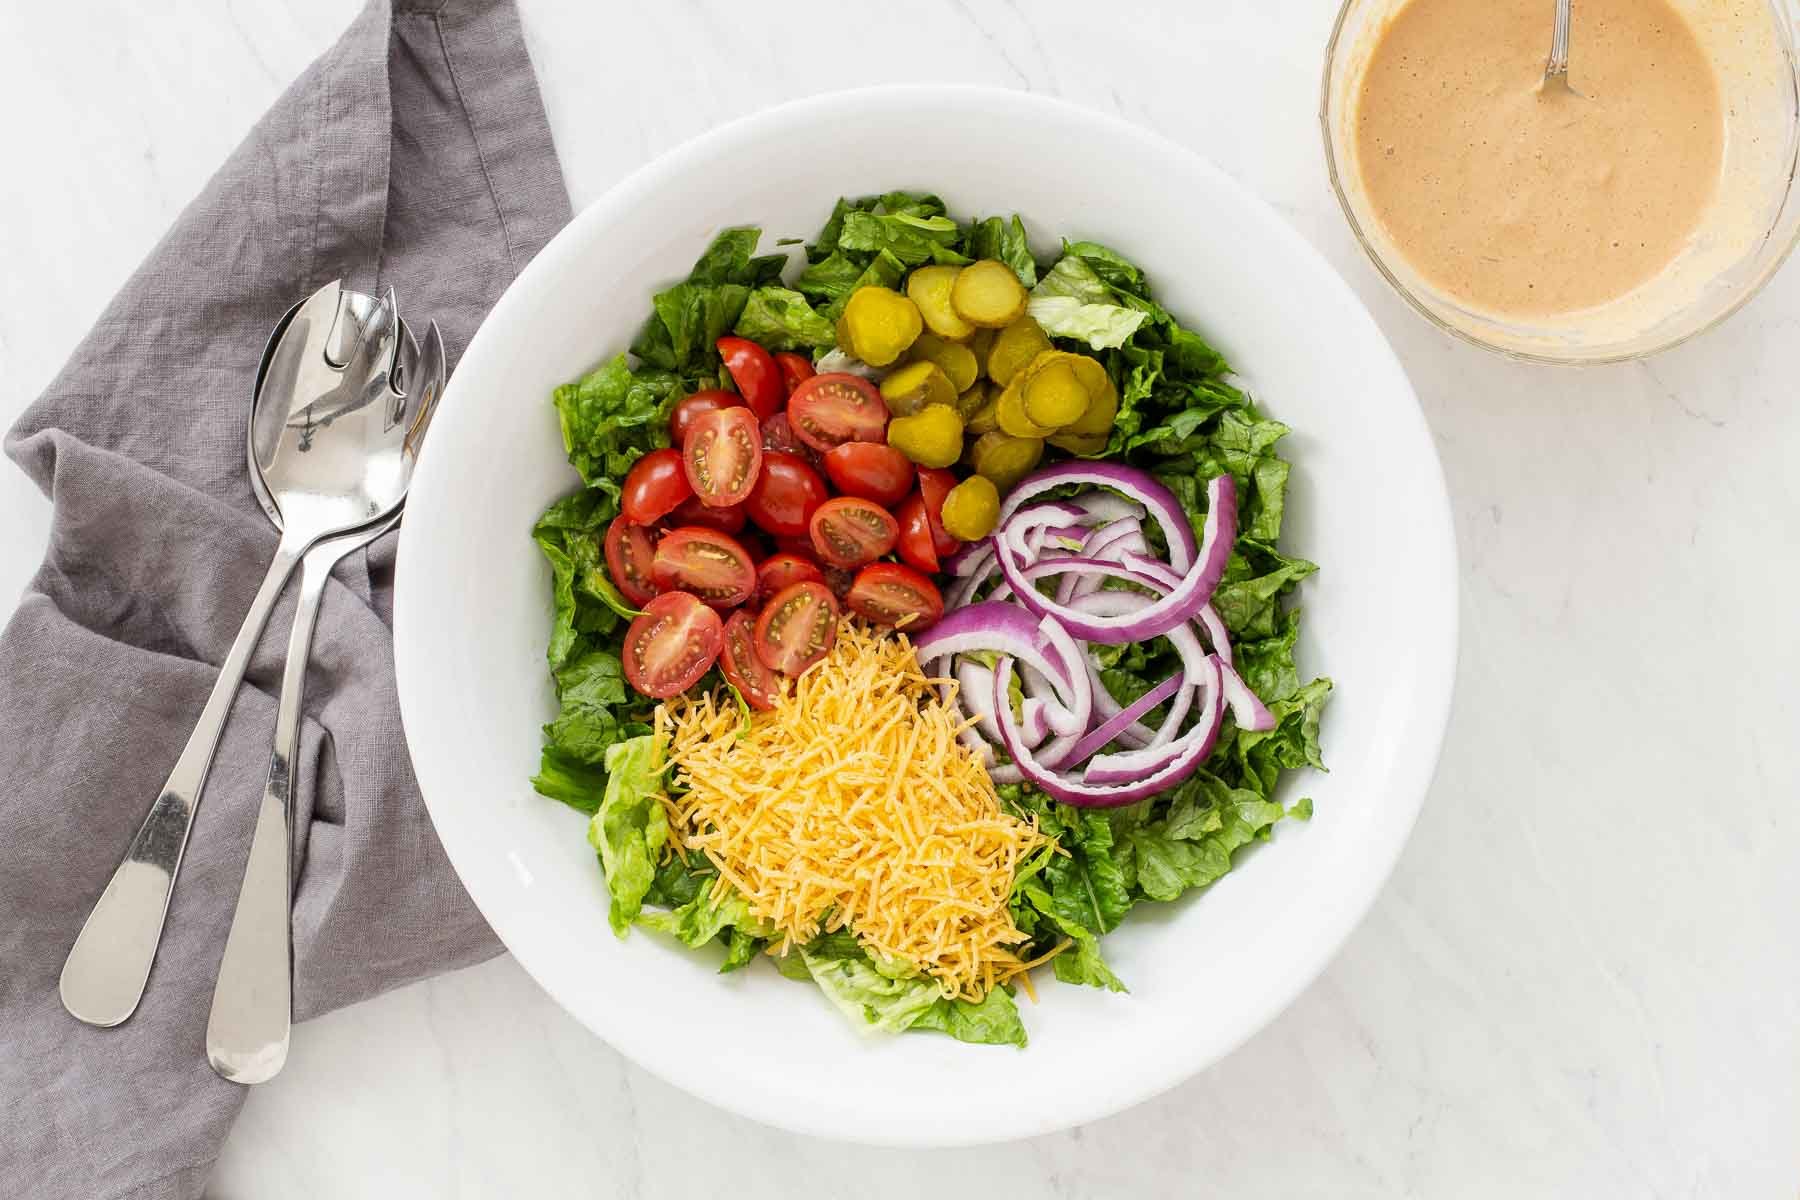 Salad bowl with shredded cheese, tomatoes, pickles and onions.